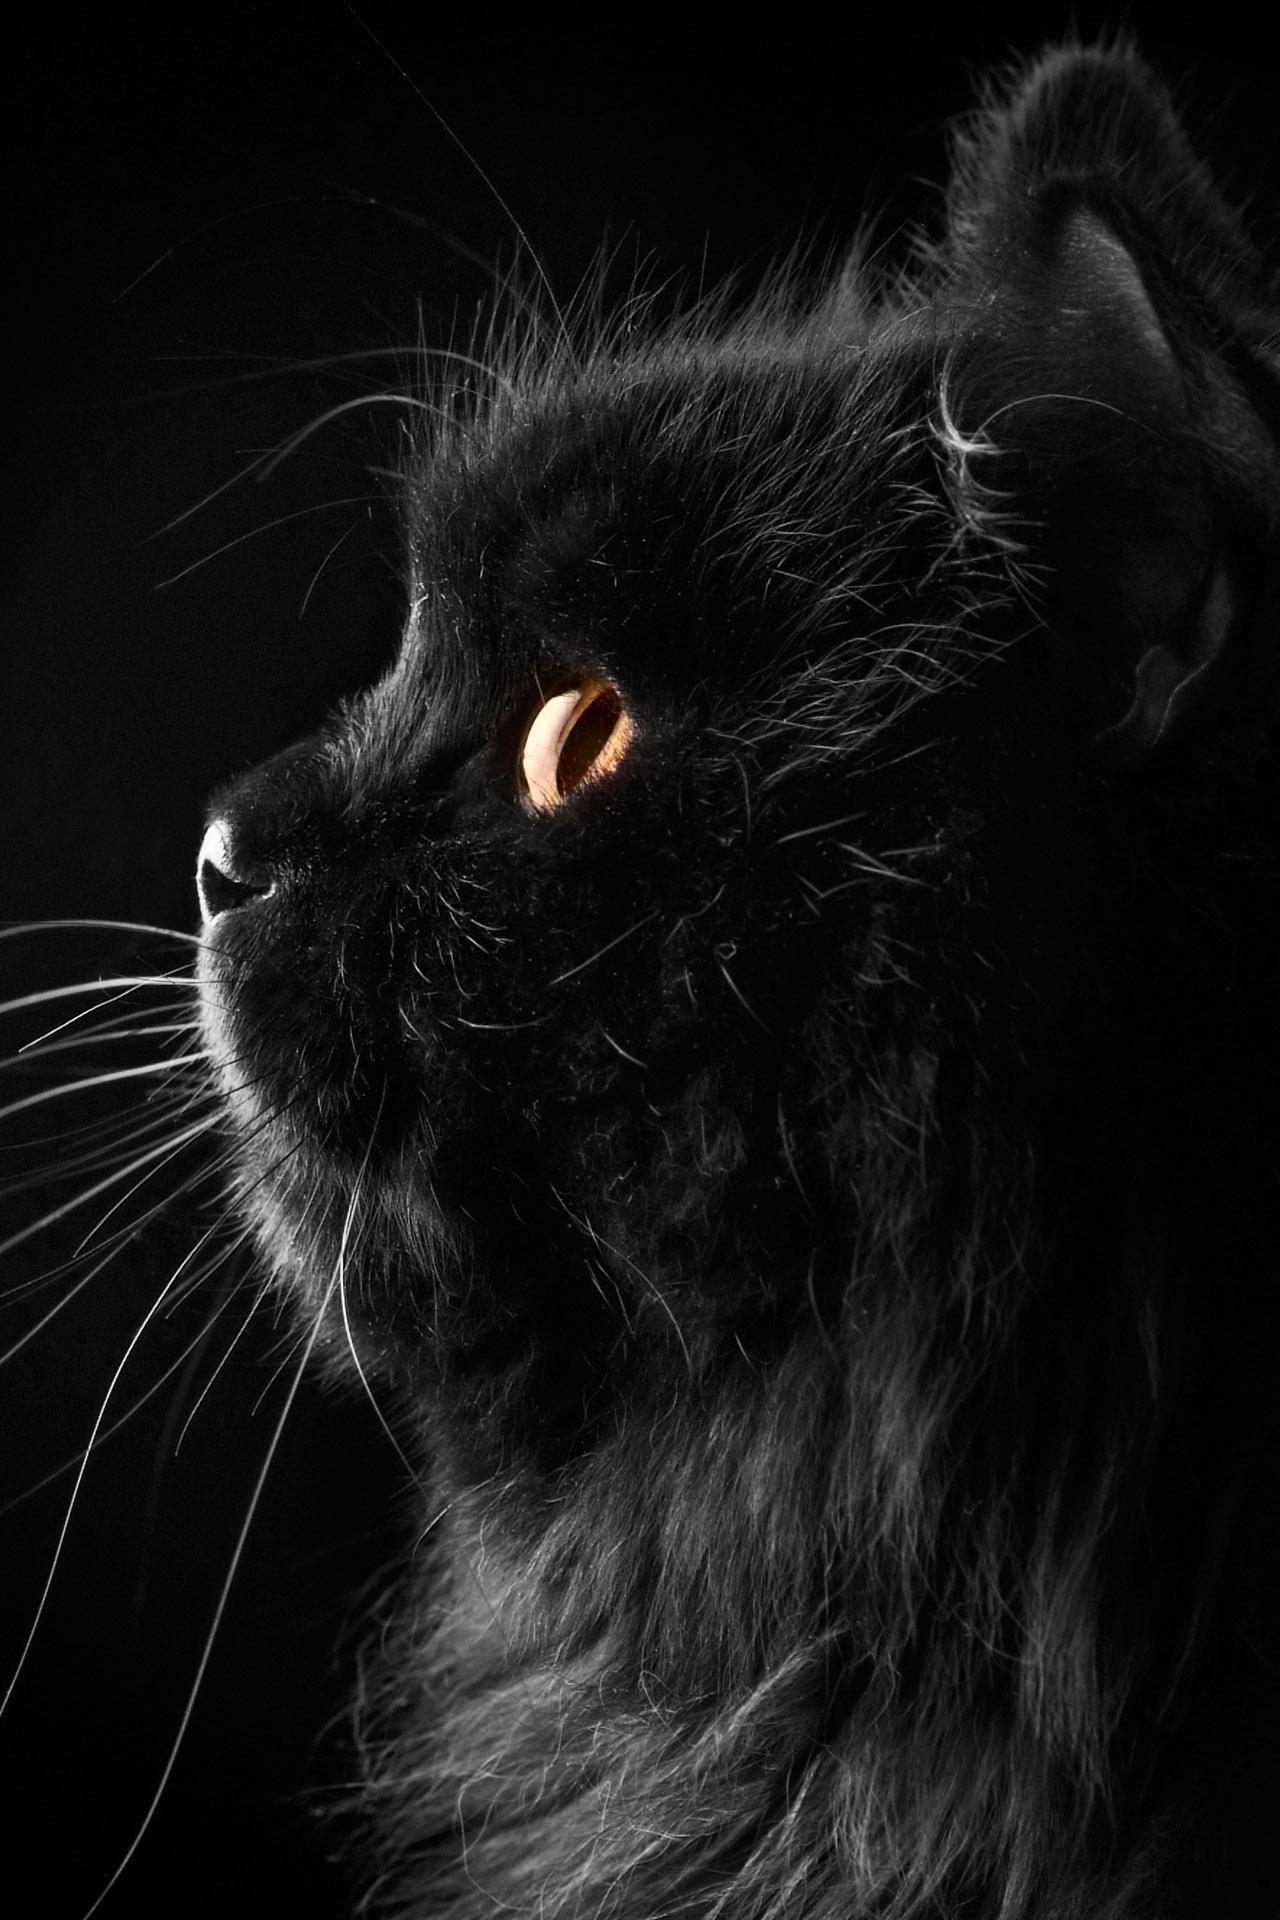 Black Cat Wallpaper Full Hd Backgrounds Themes For Android Apk Download